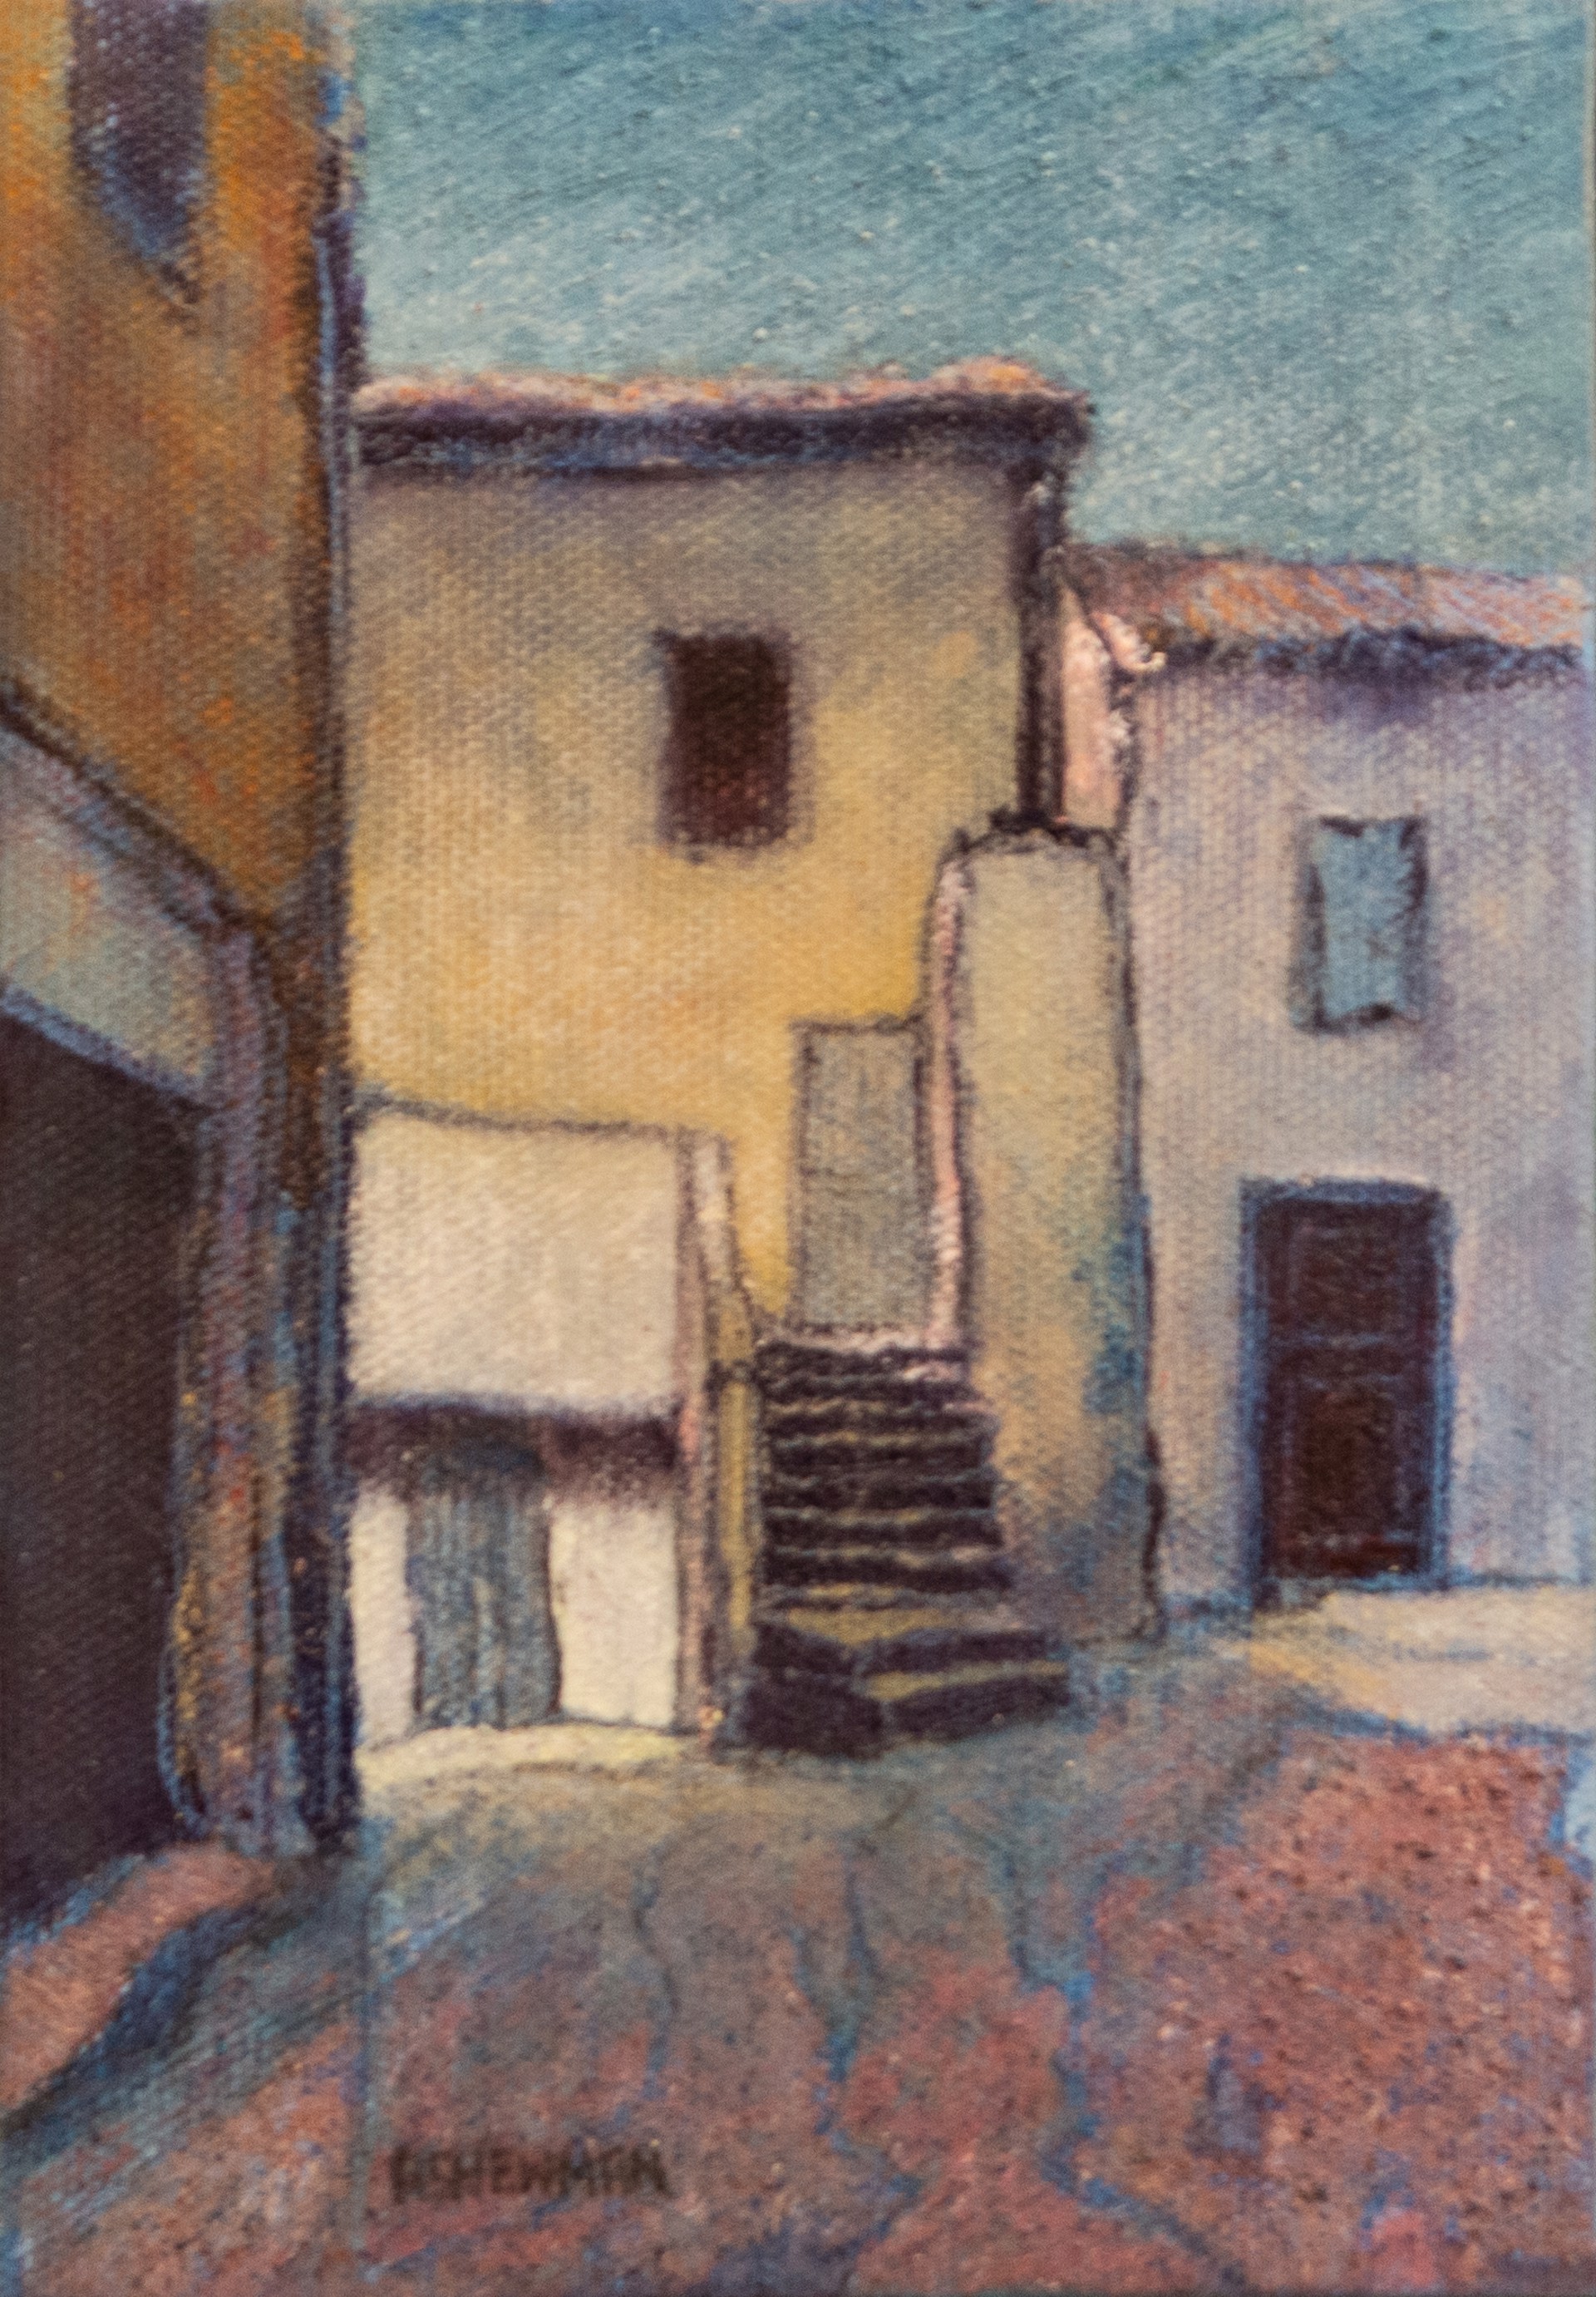 House with Stairs (St. Pons) by Andy Newman